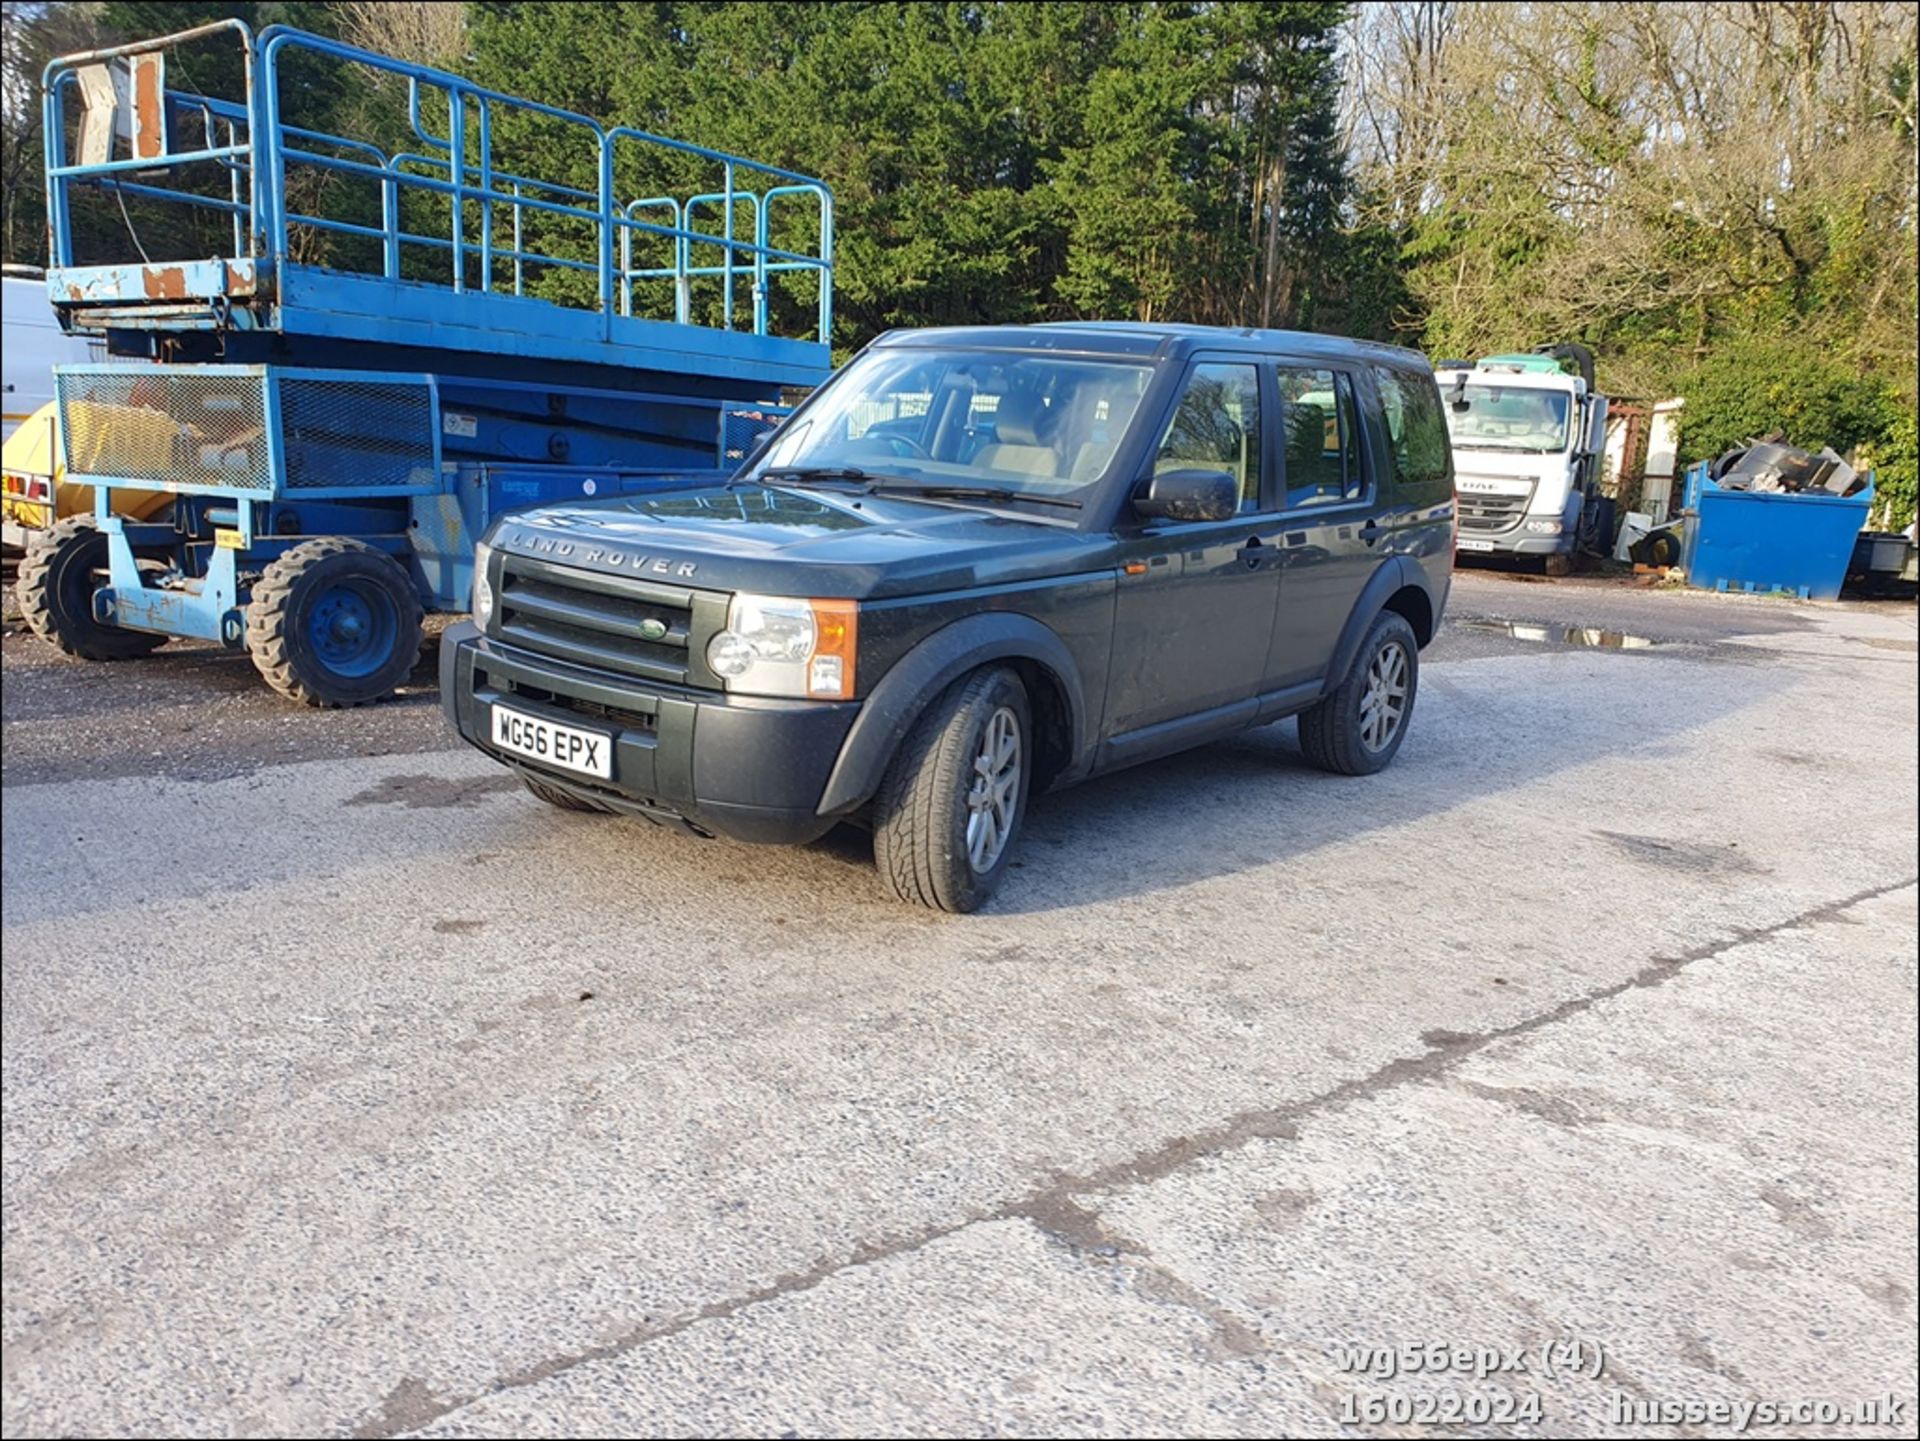 06/56 LAND ROVER DISCOVERY TDV6 GS - 2720cc 5dr Estate (Green) - Image 3 of 44